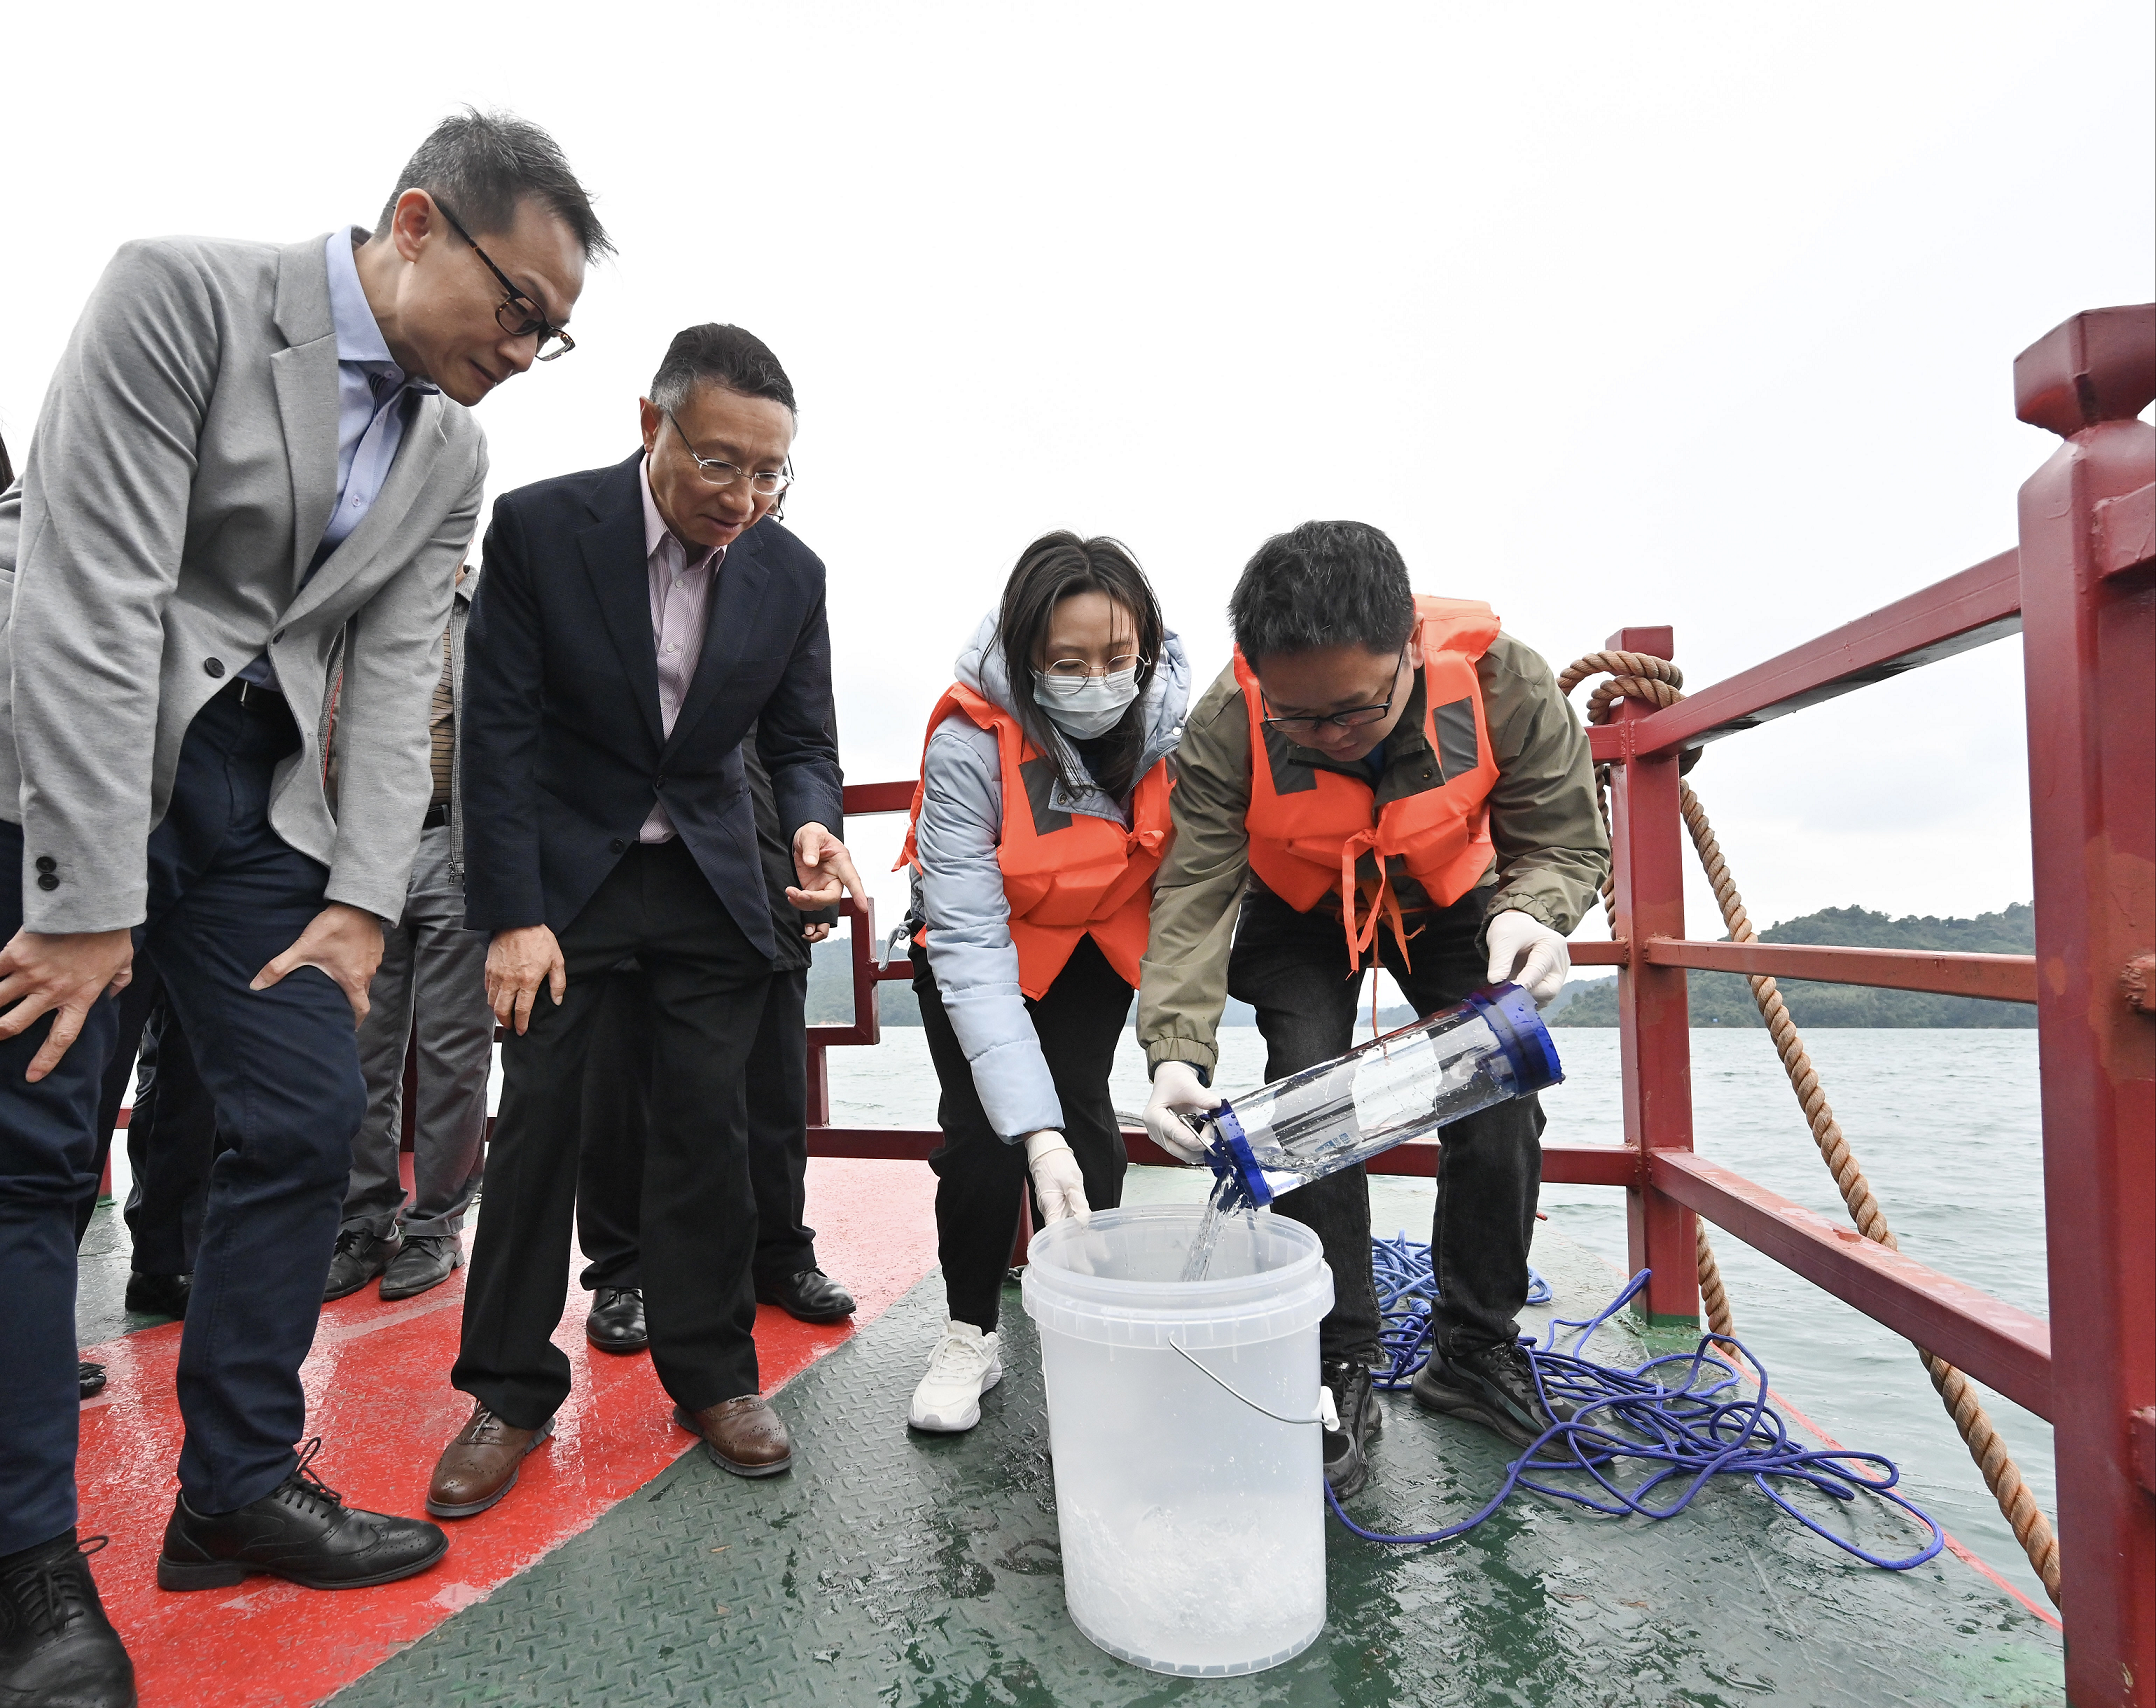 The Advisory Committee on Water Supplies (ACWS) delegation left for Guangdong Province yesterday (November 13) to visit the Dongjiang Water Supply System and returned to Hong Kong this afternoon (November 14). Photo shows the Chairman of the ACWS, Professor Joseph Kwan (second left), and the Director of Water Supplies, Mr Tony Yau (first left), taking a boat trip to visit the Xinfengjiang Reservoir and inspect the quality of water sample there yesterday.